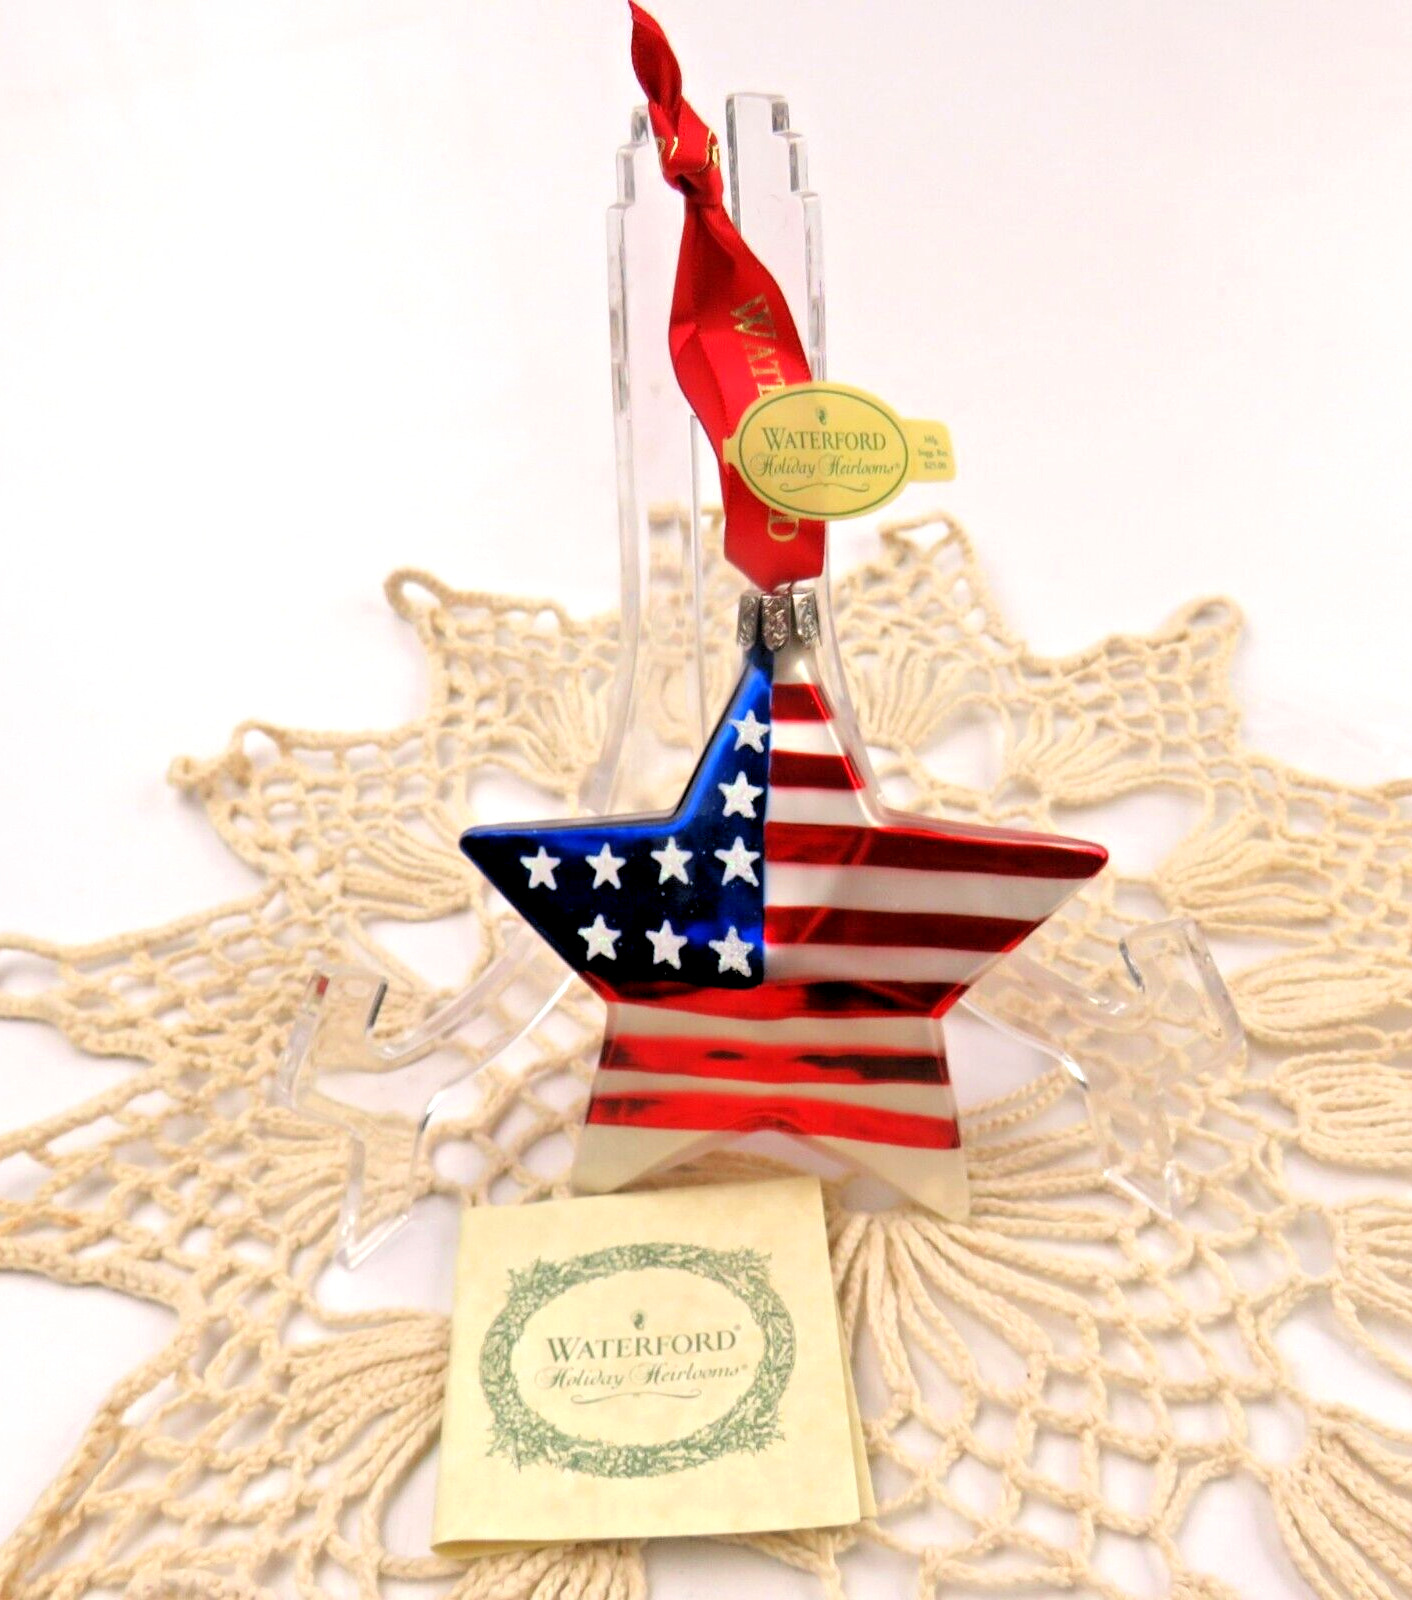 Waterford Holiday Heirlooms Glass Star Ornaments Stars and Stripes NIB 2010